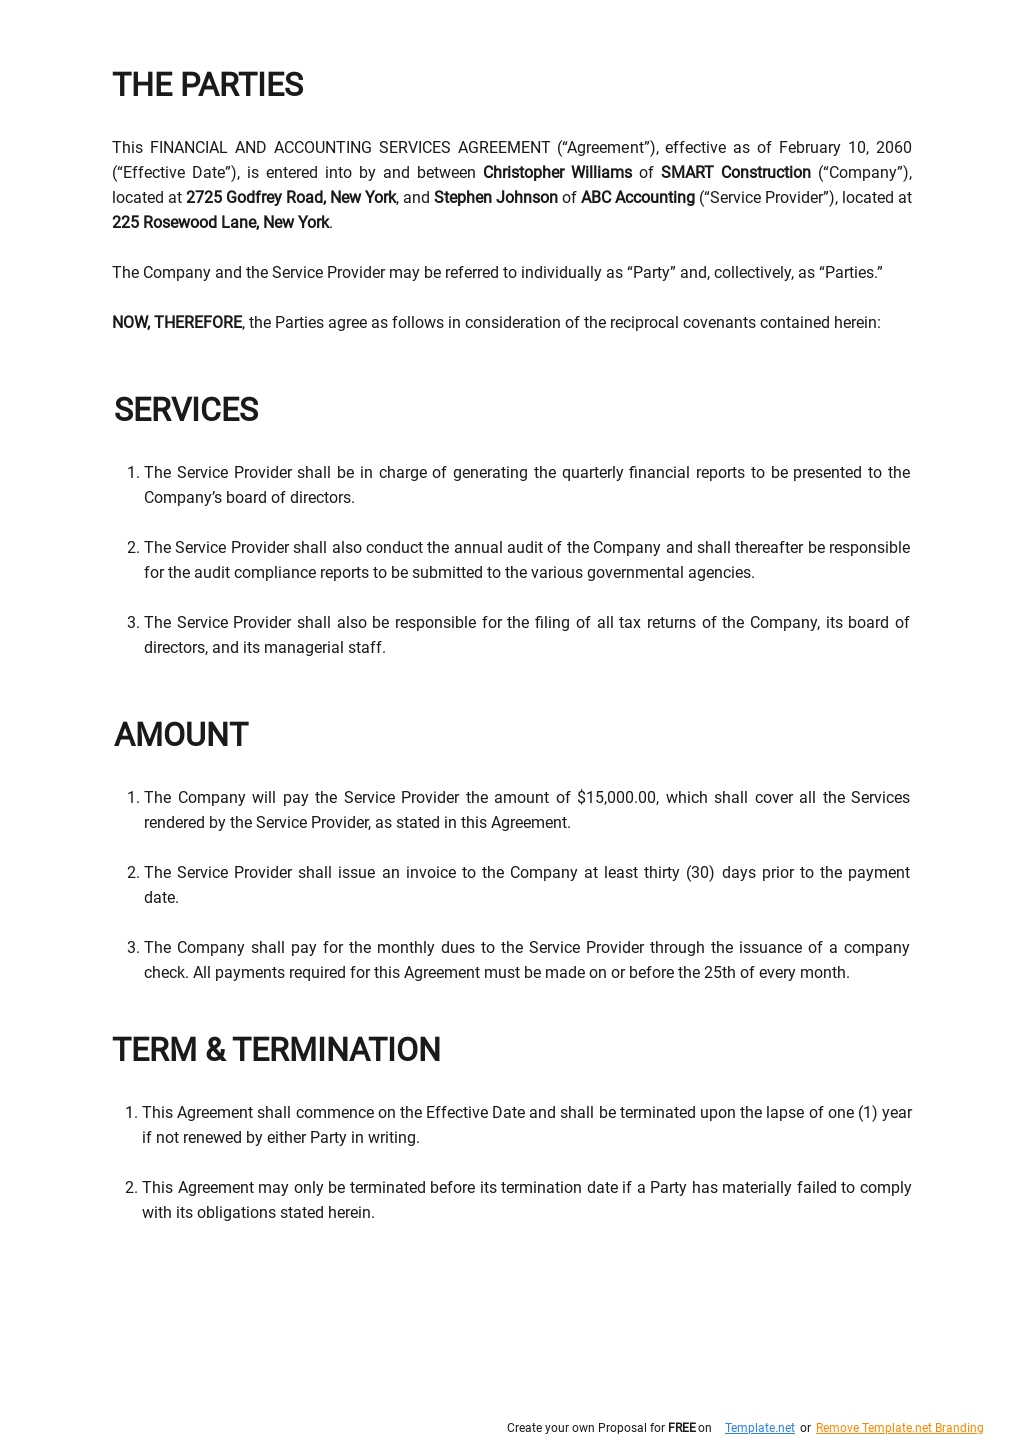 Financial and Accounting Services Agreement Template  1.jpe